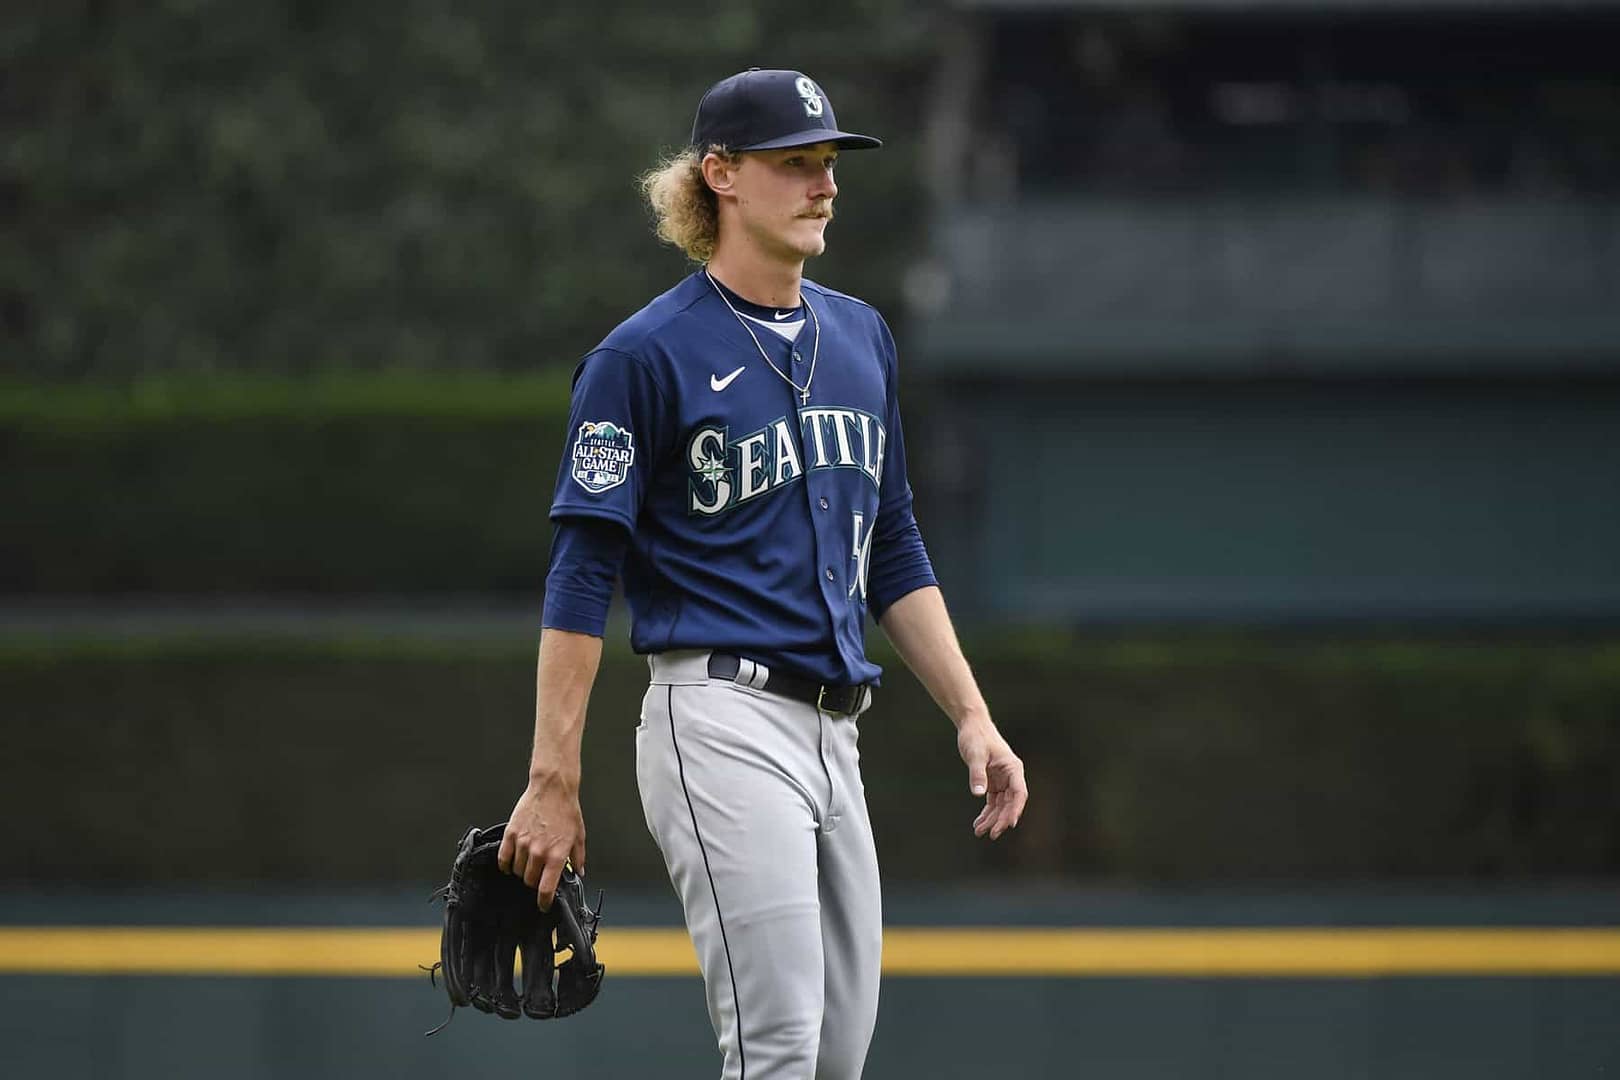 For our best MLB bets today, which features a nifty BetMGM bonus code, we make our Mariners-Athletics pick so you can see...